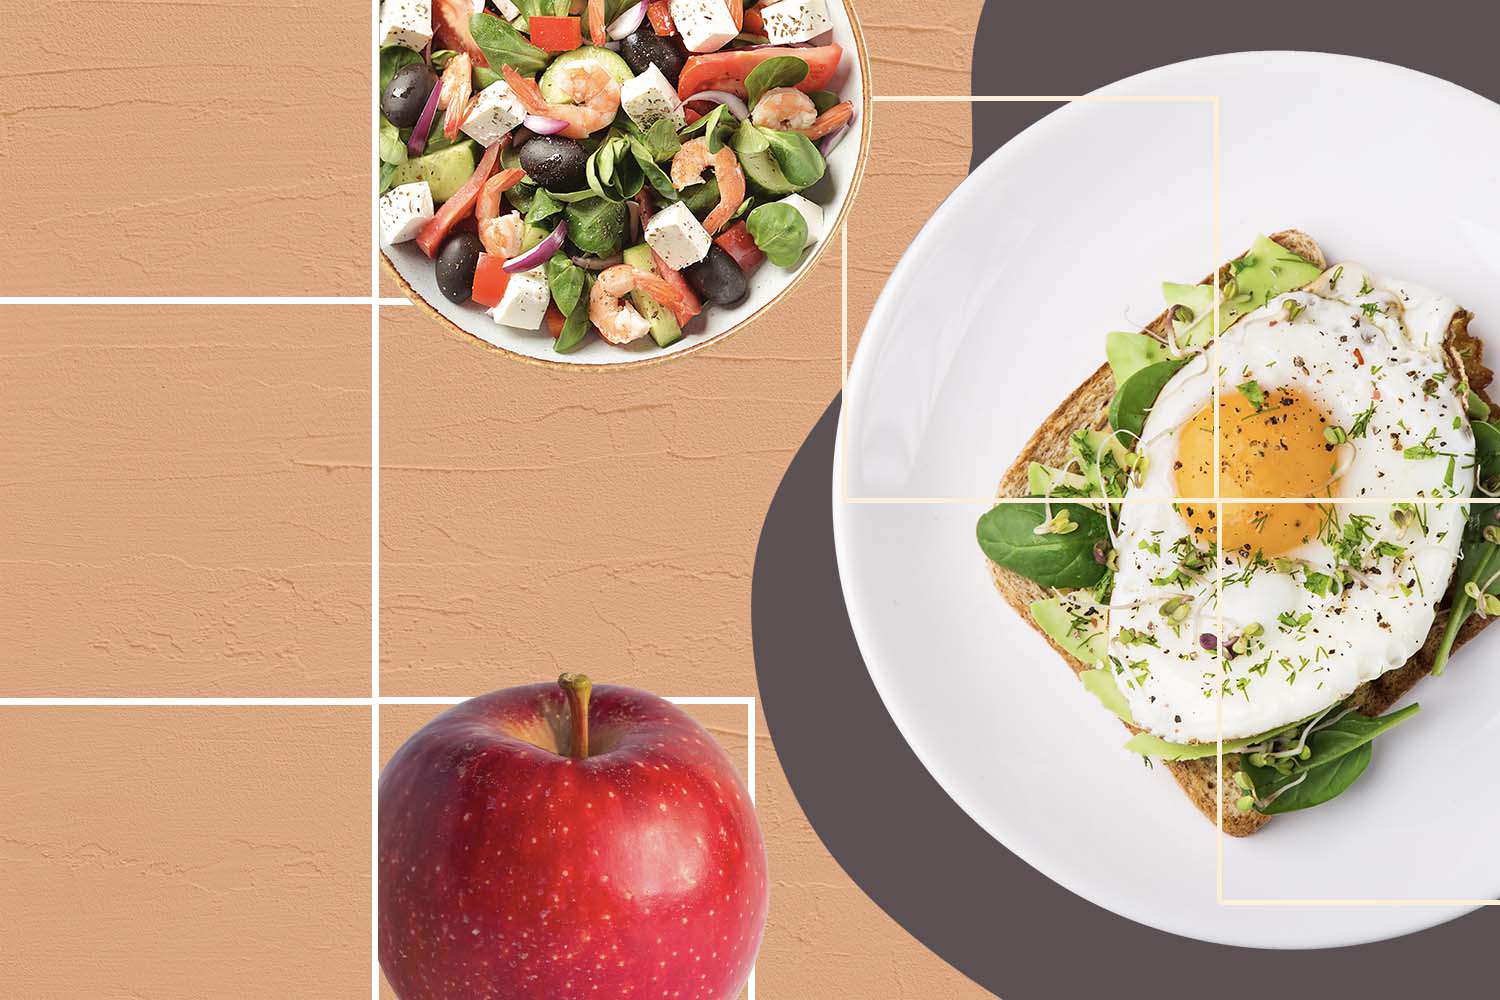 Meal plan for prediabetes with avocado toast, apple, and shrimp salad